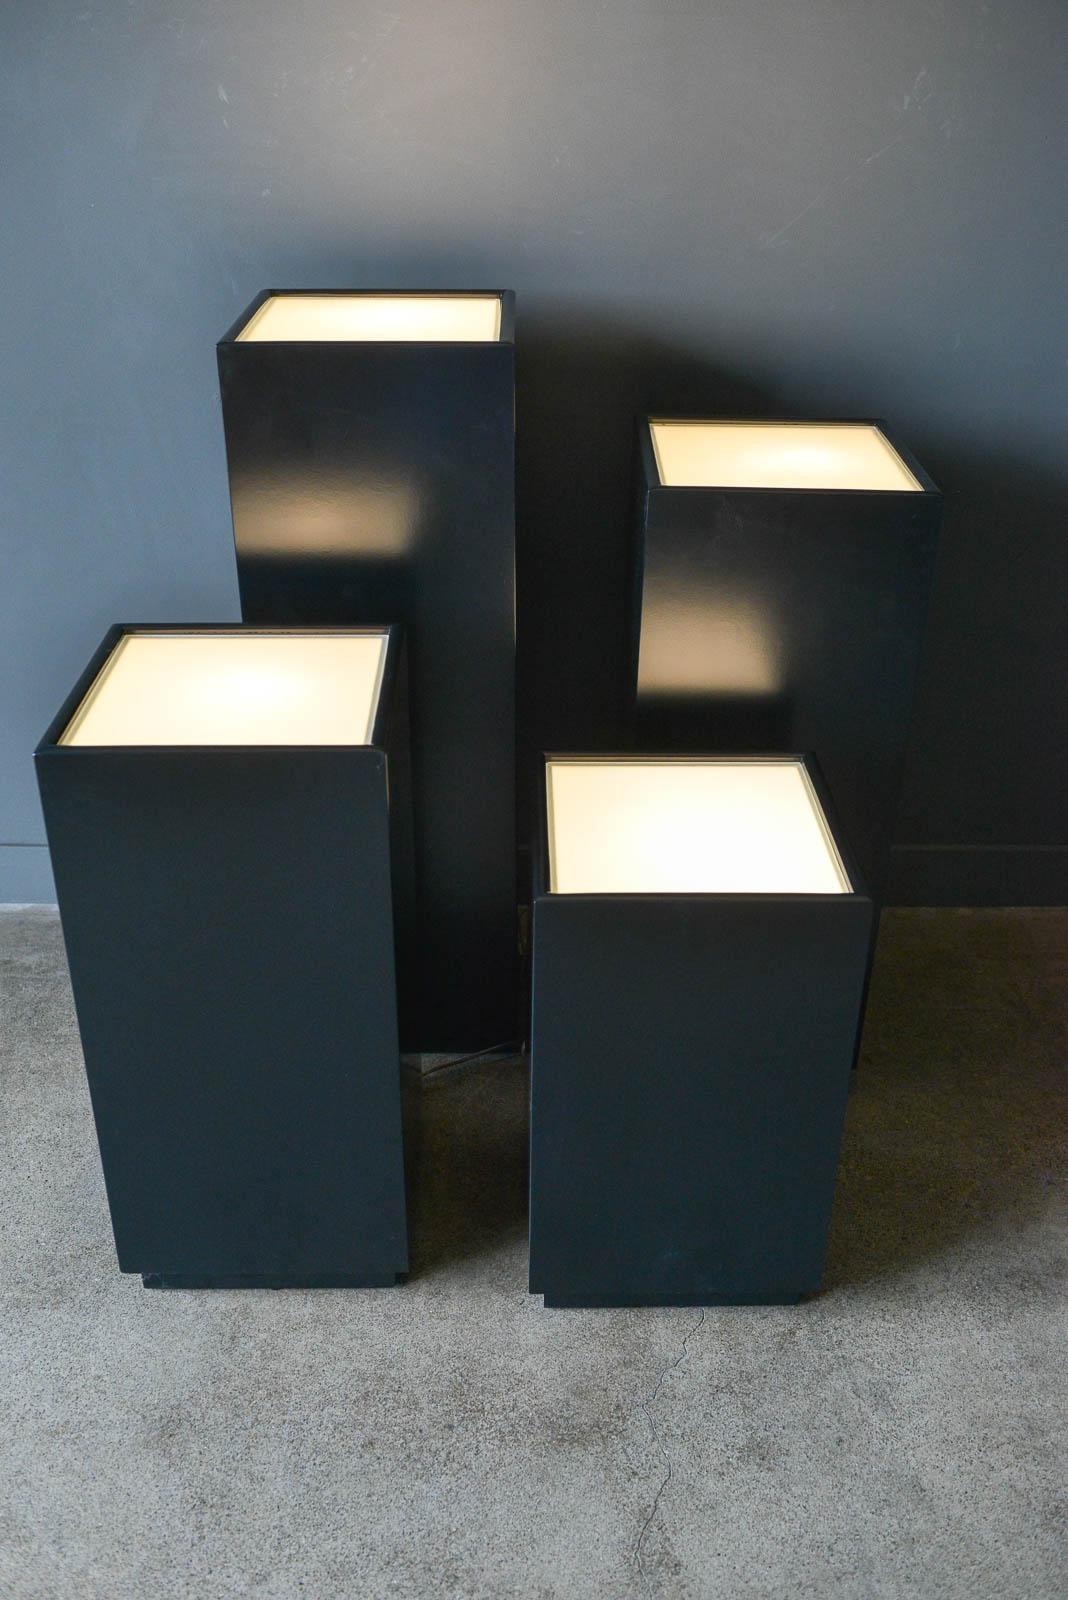 Vintage Illuminated Display Pedestals by Albright and Zimmerman, ca. 1984. Original frosted glass and round dimmer switches. Perfect for displaying art and sculpture. Professionally restored in black with white interior to reflect more light onto